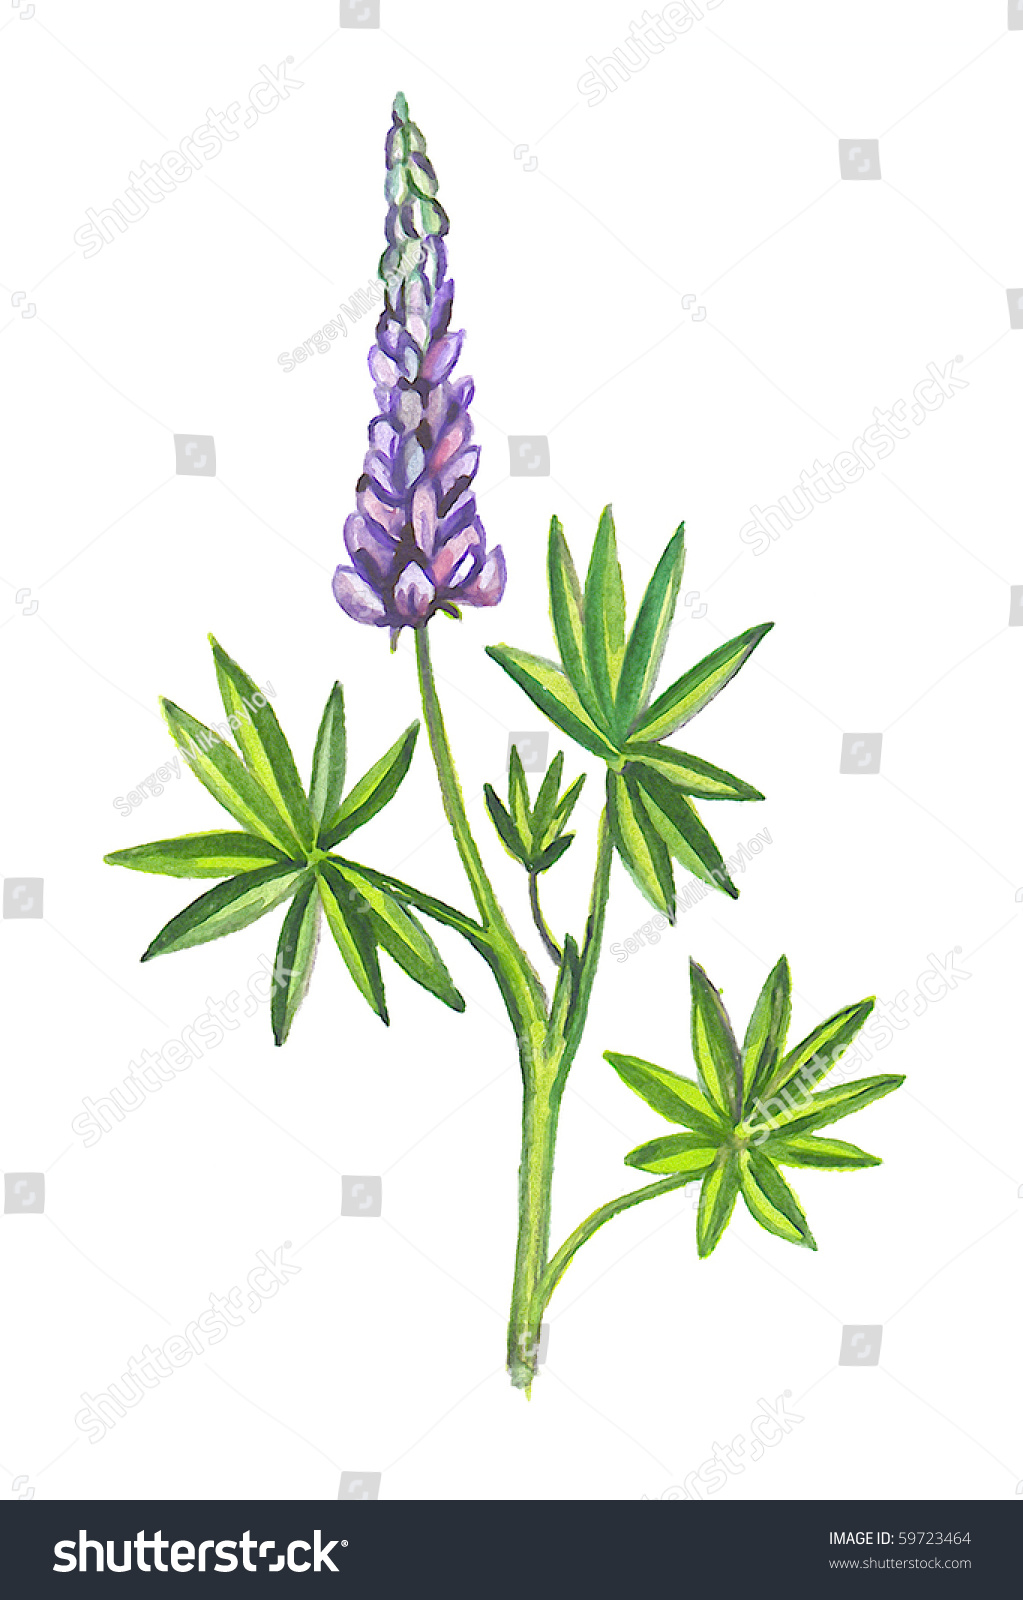 Lupins Lupines Illustration Watercolor Stock Illustration 59723464